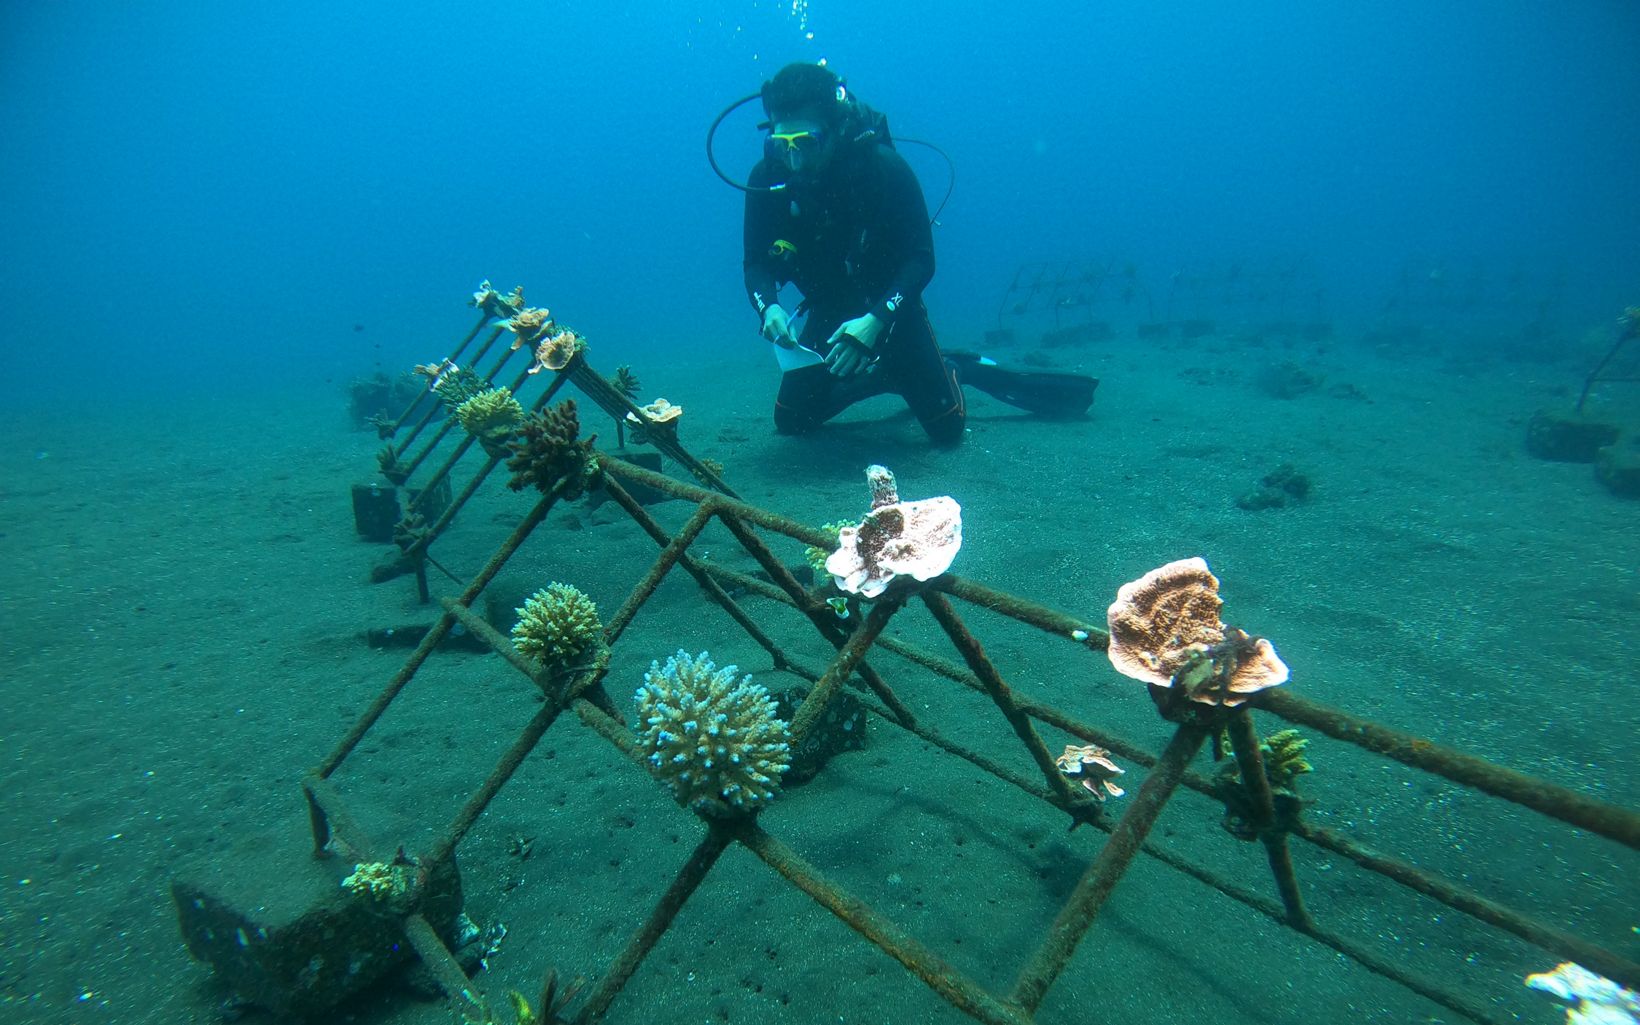 A scuba diver on the ocean floor alongside coral reef structures.